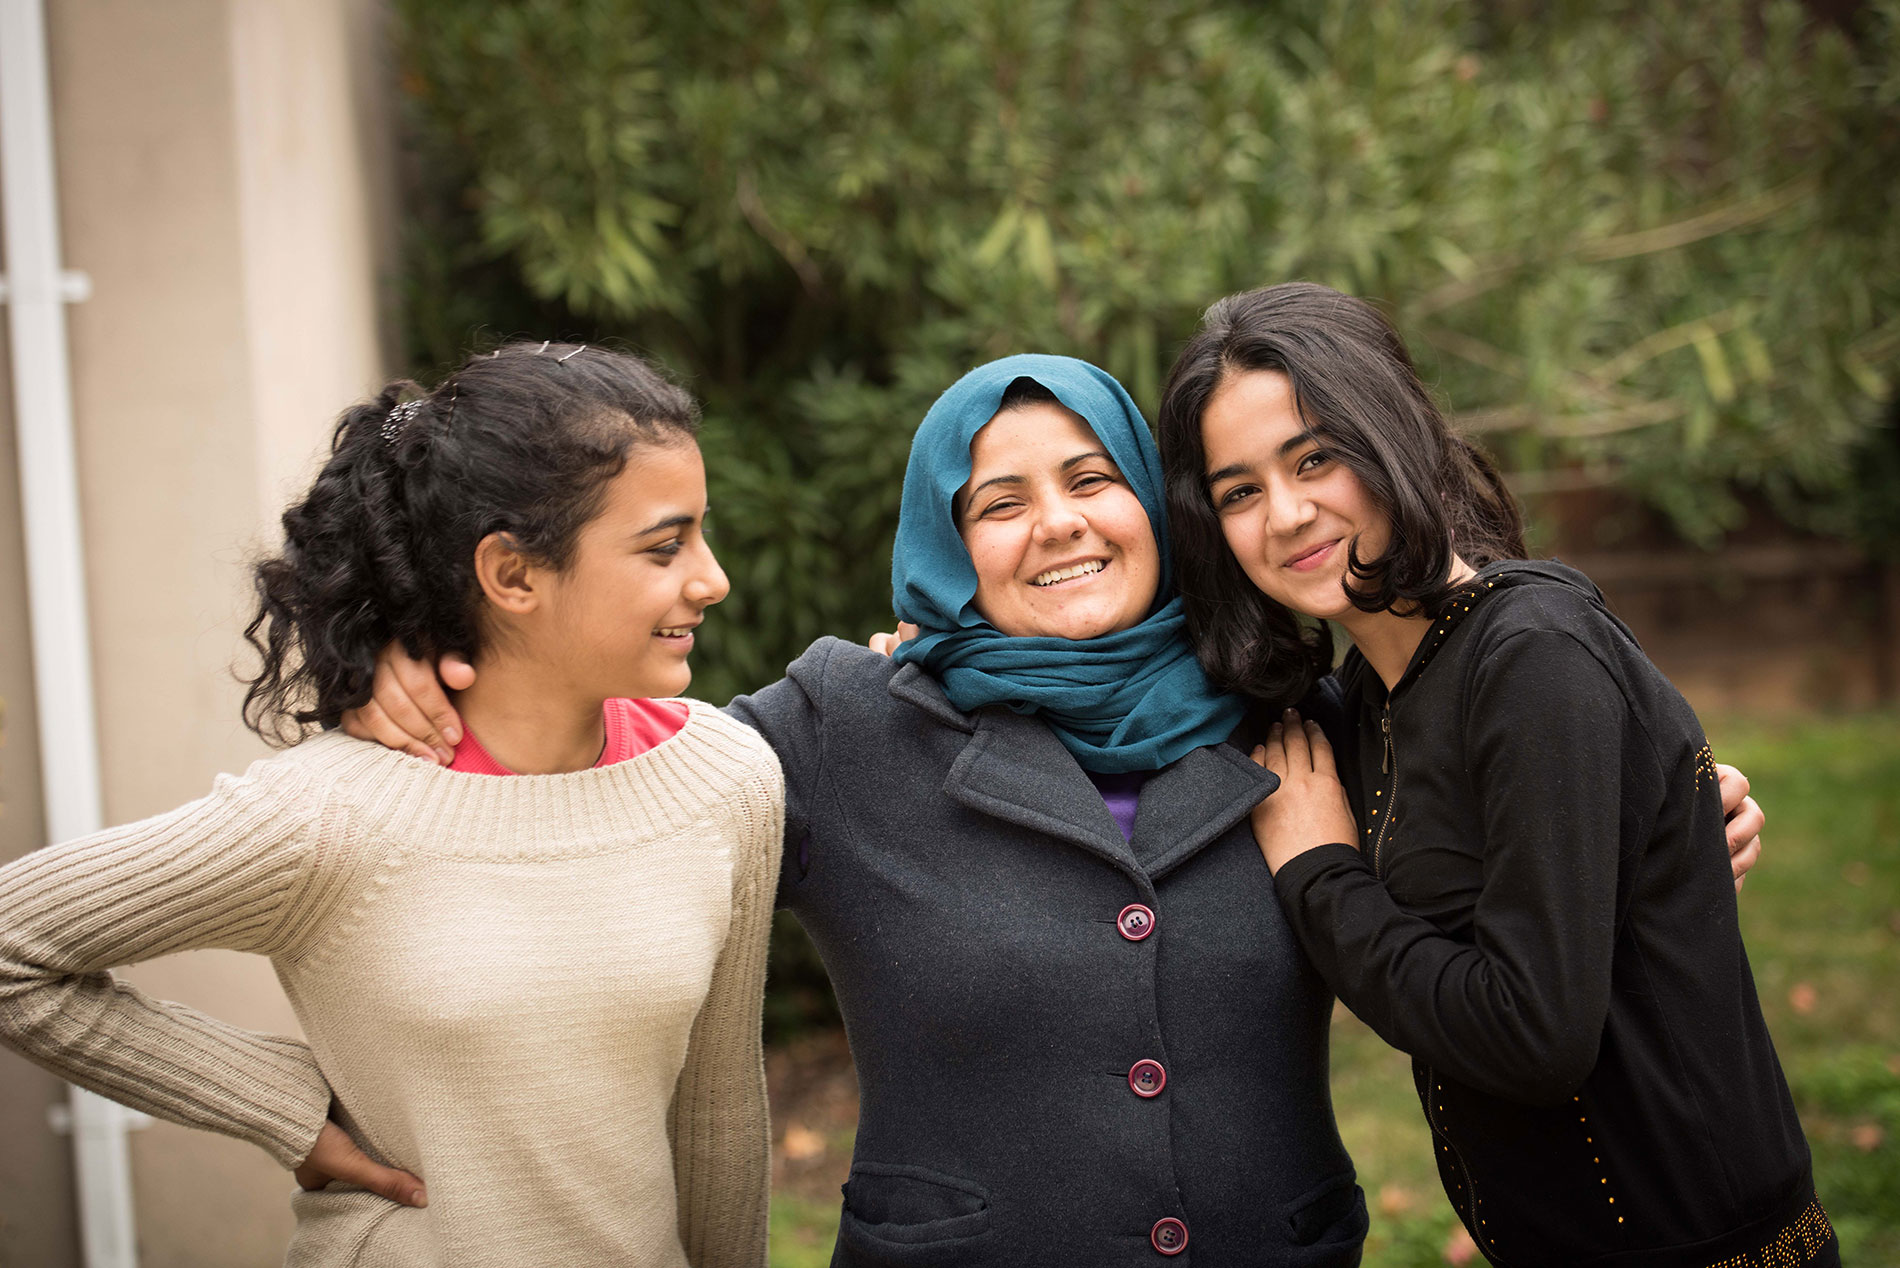 A refugee mother and her two teenage daughters